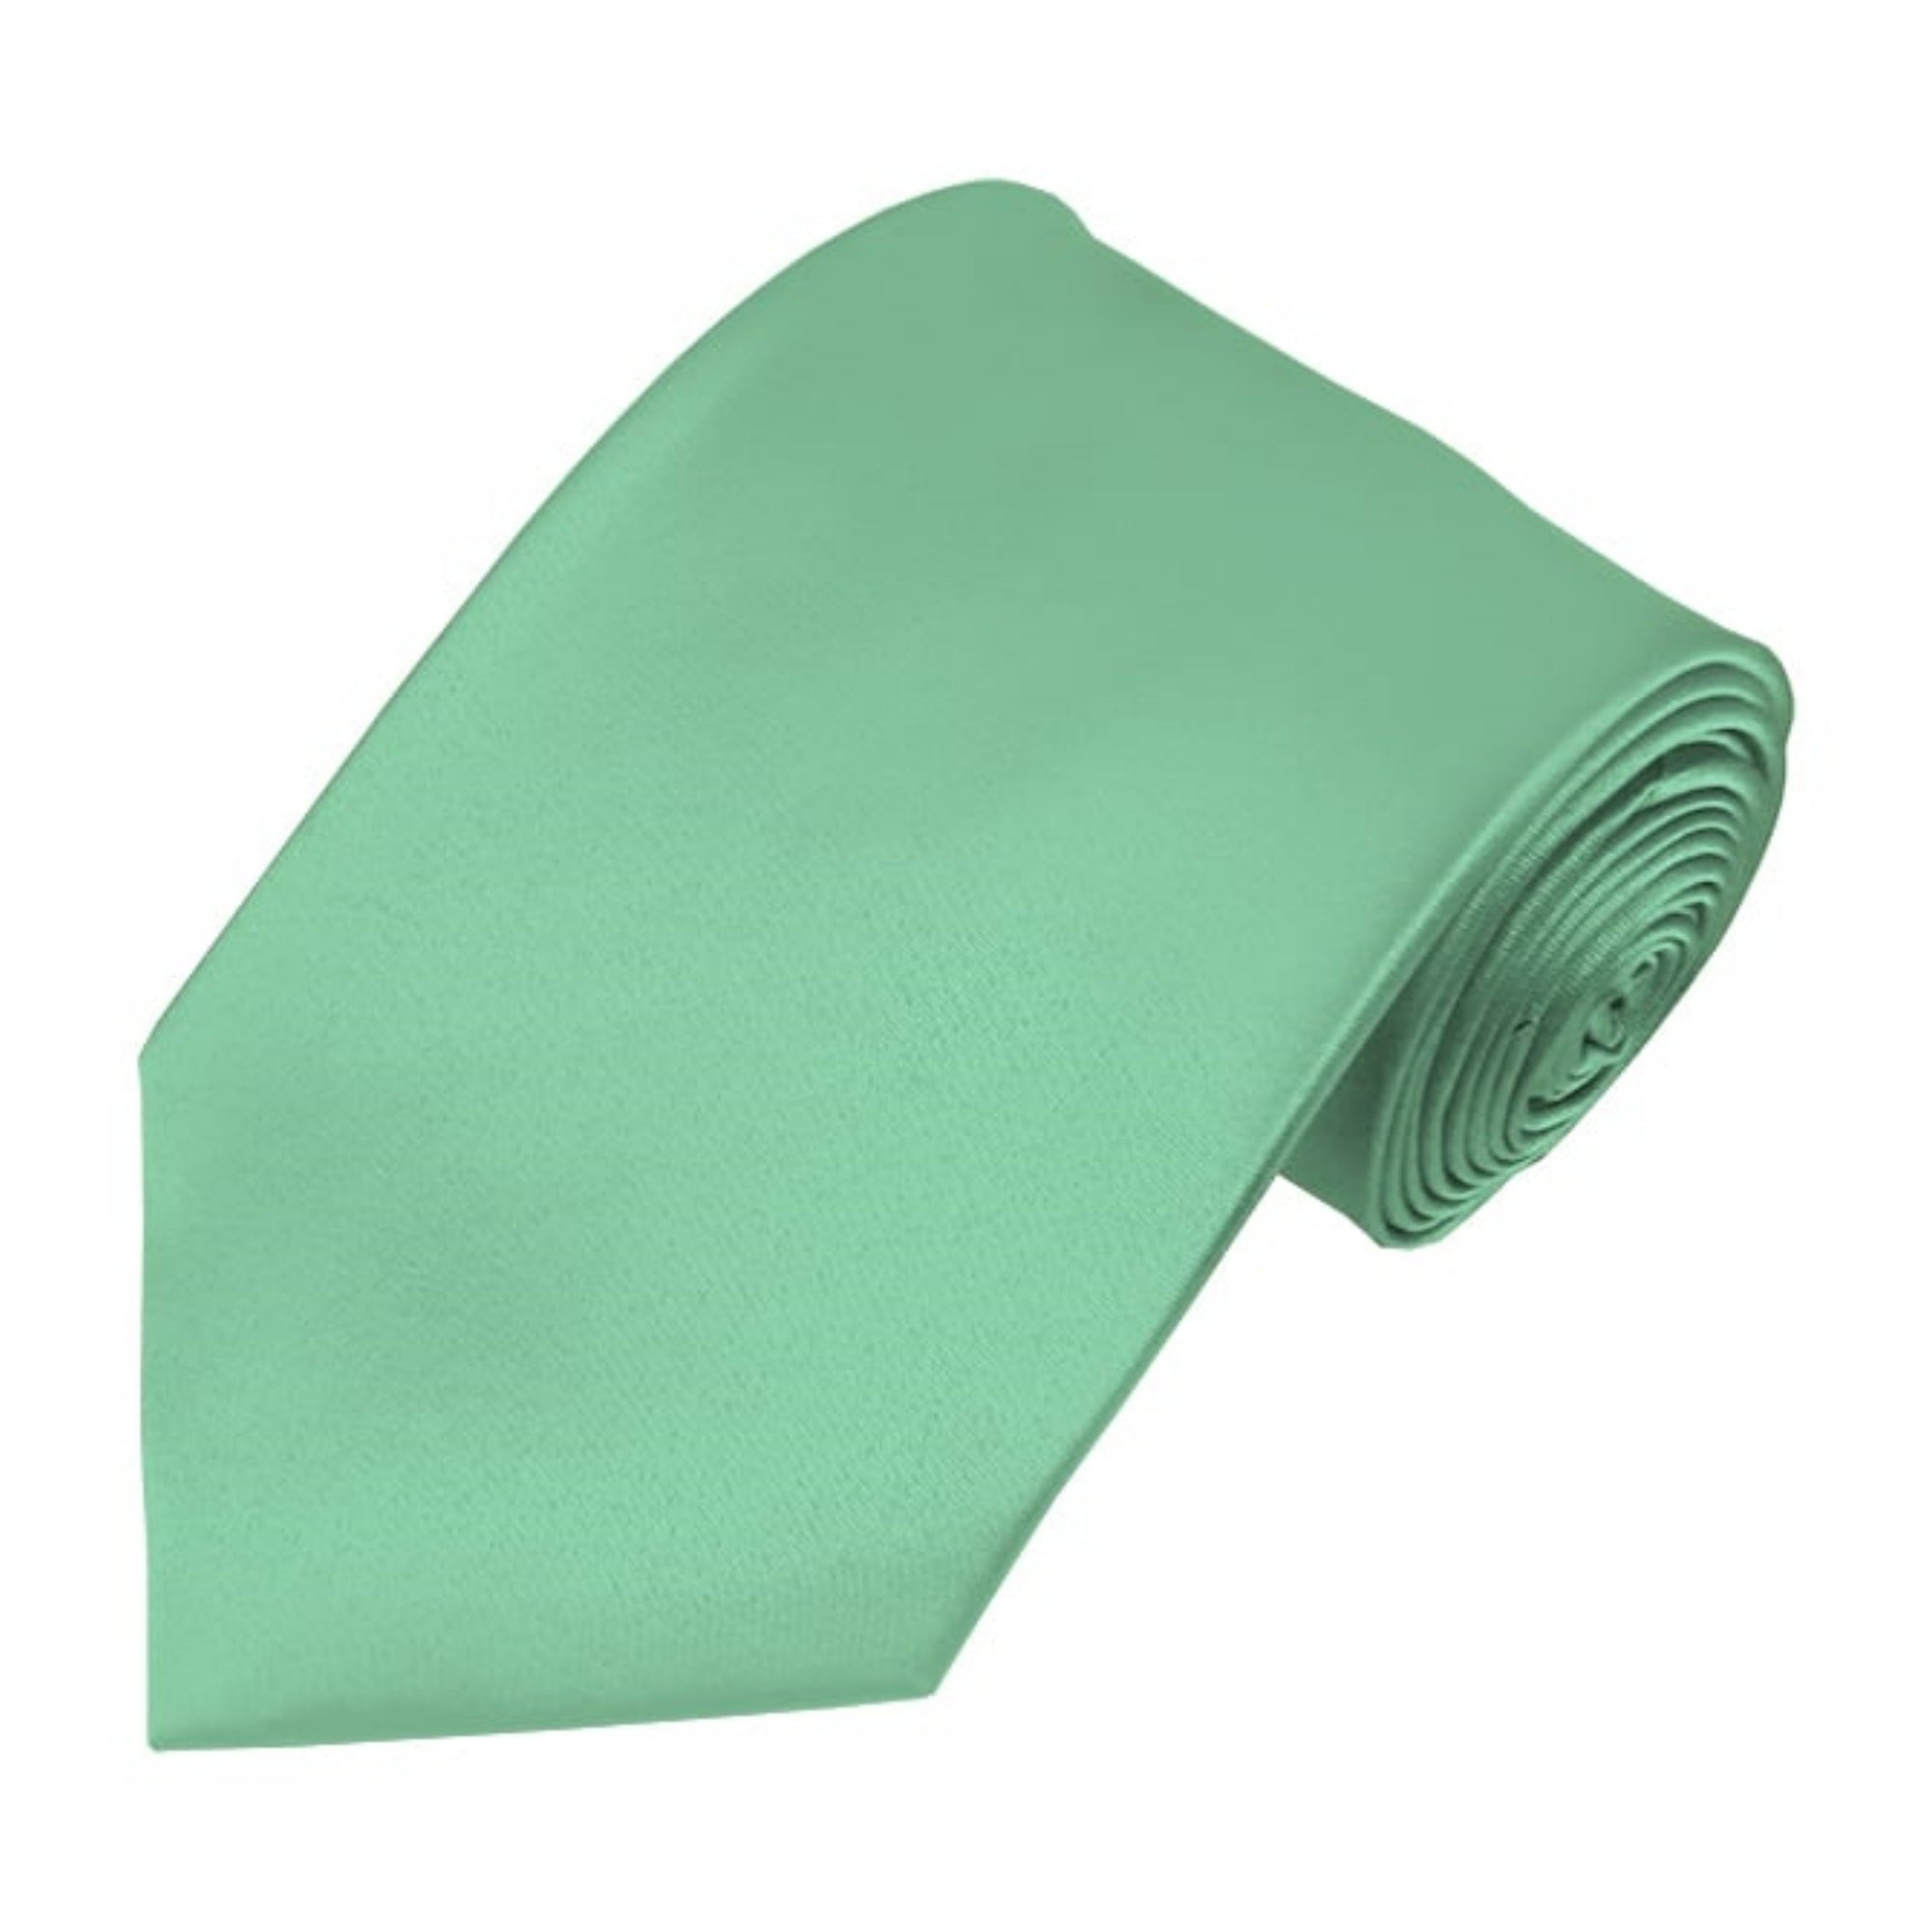 TheDapperTie Men's Solid Color Traditional 3.35 Inch Wide And 58 Inch Long Neckties Neck Tie TheDapperTie Mint Green  